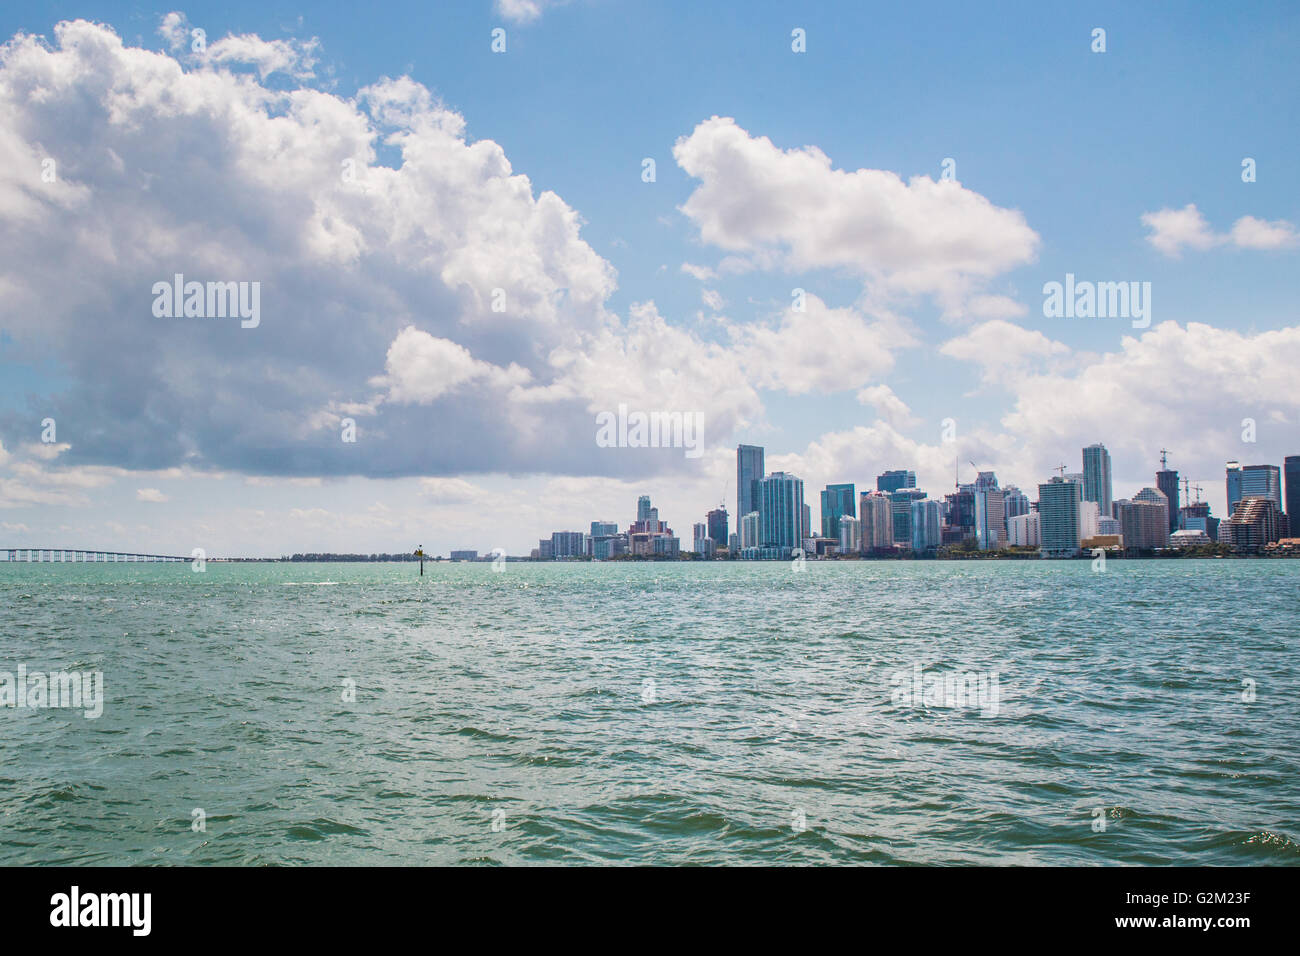 View of modern downtown Miami Florida, USA skyline seen from across Biscayne Bay with clouds overhead Stock Photo